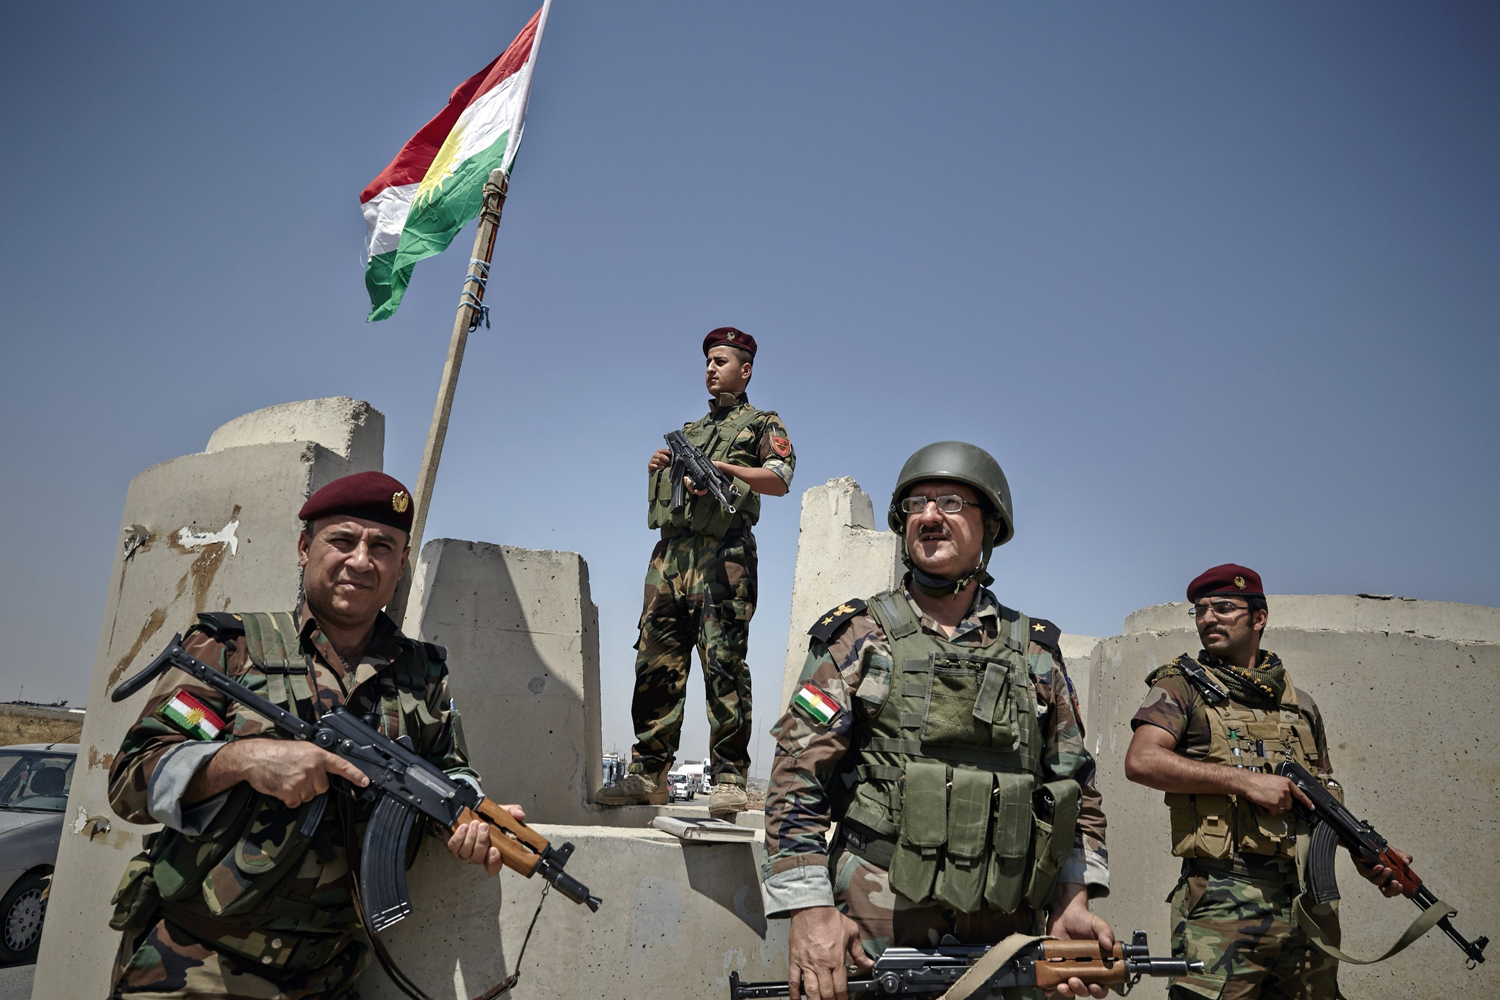 Kurdish Peshmerga fighters provide security at the last checkpoint outside of Mosul on June 14. (Sebastiano Tomada—Getty Images)